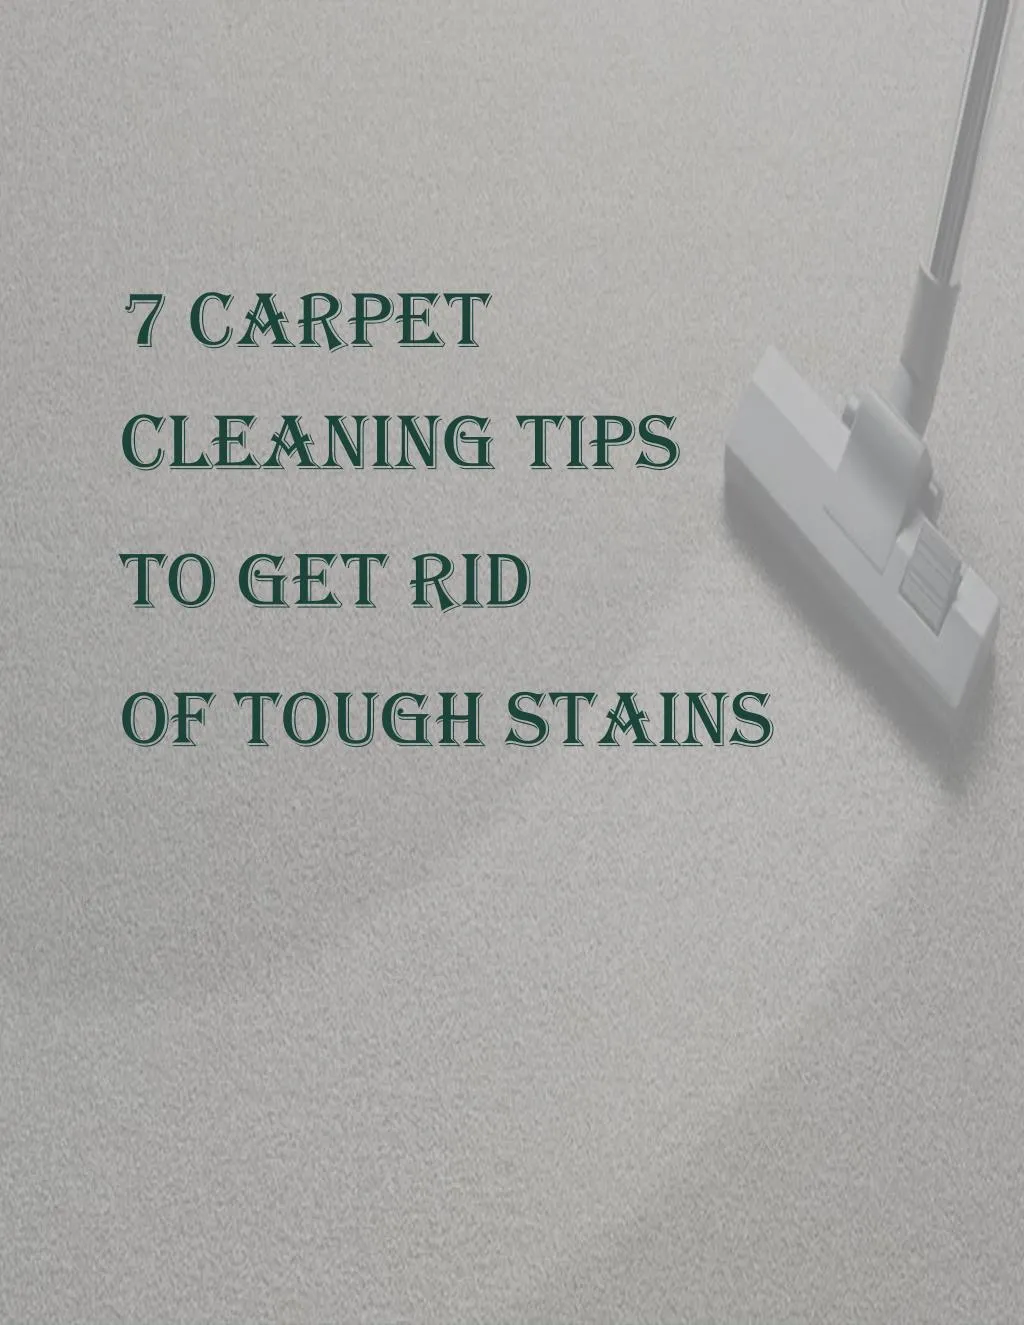 7 carpet cleaning tips